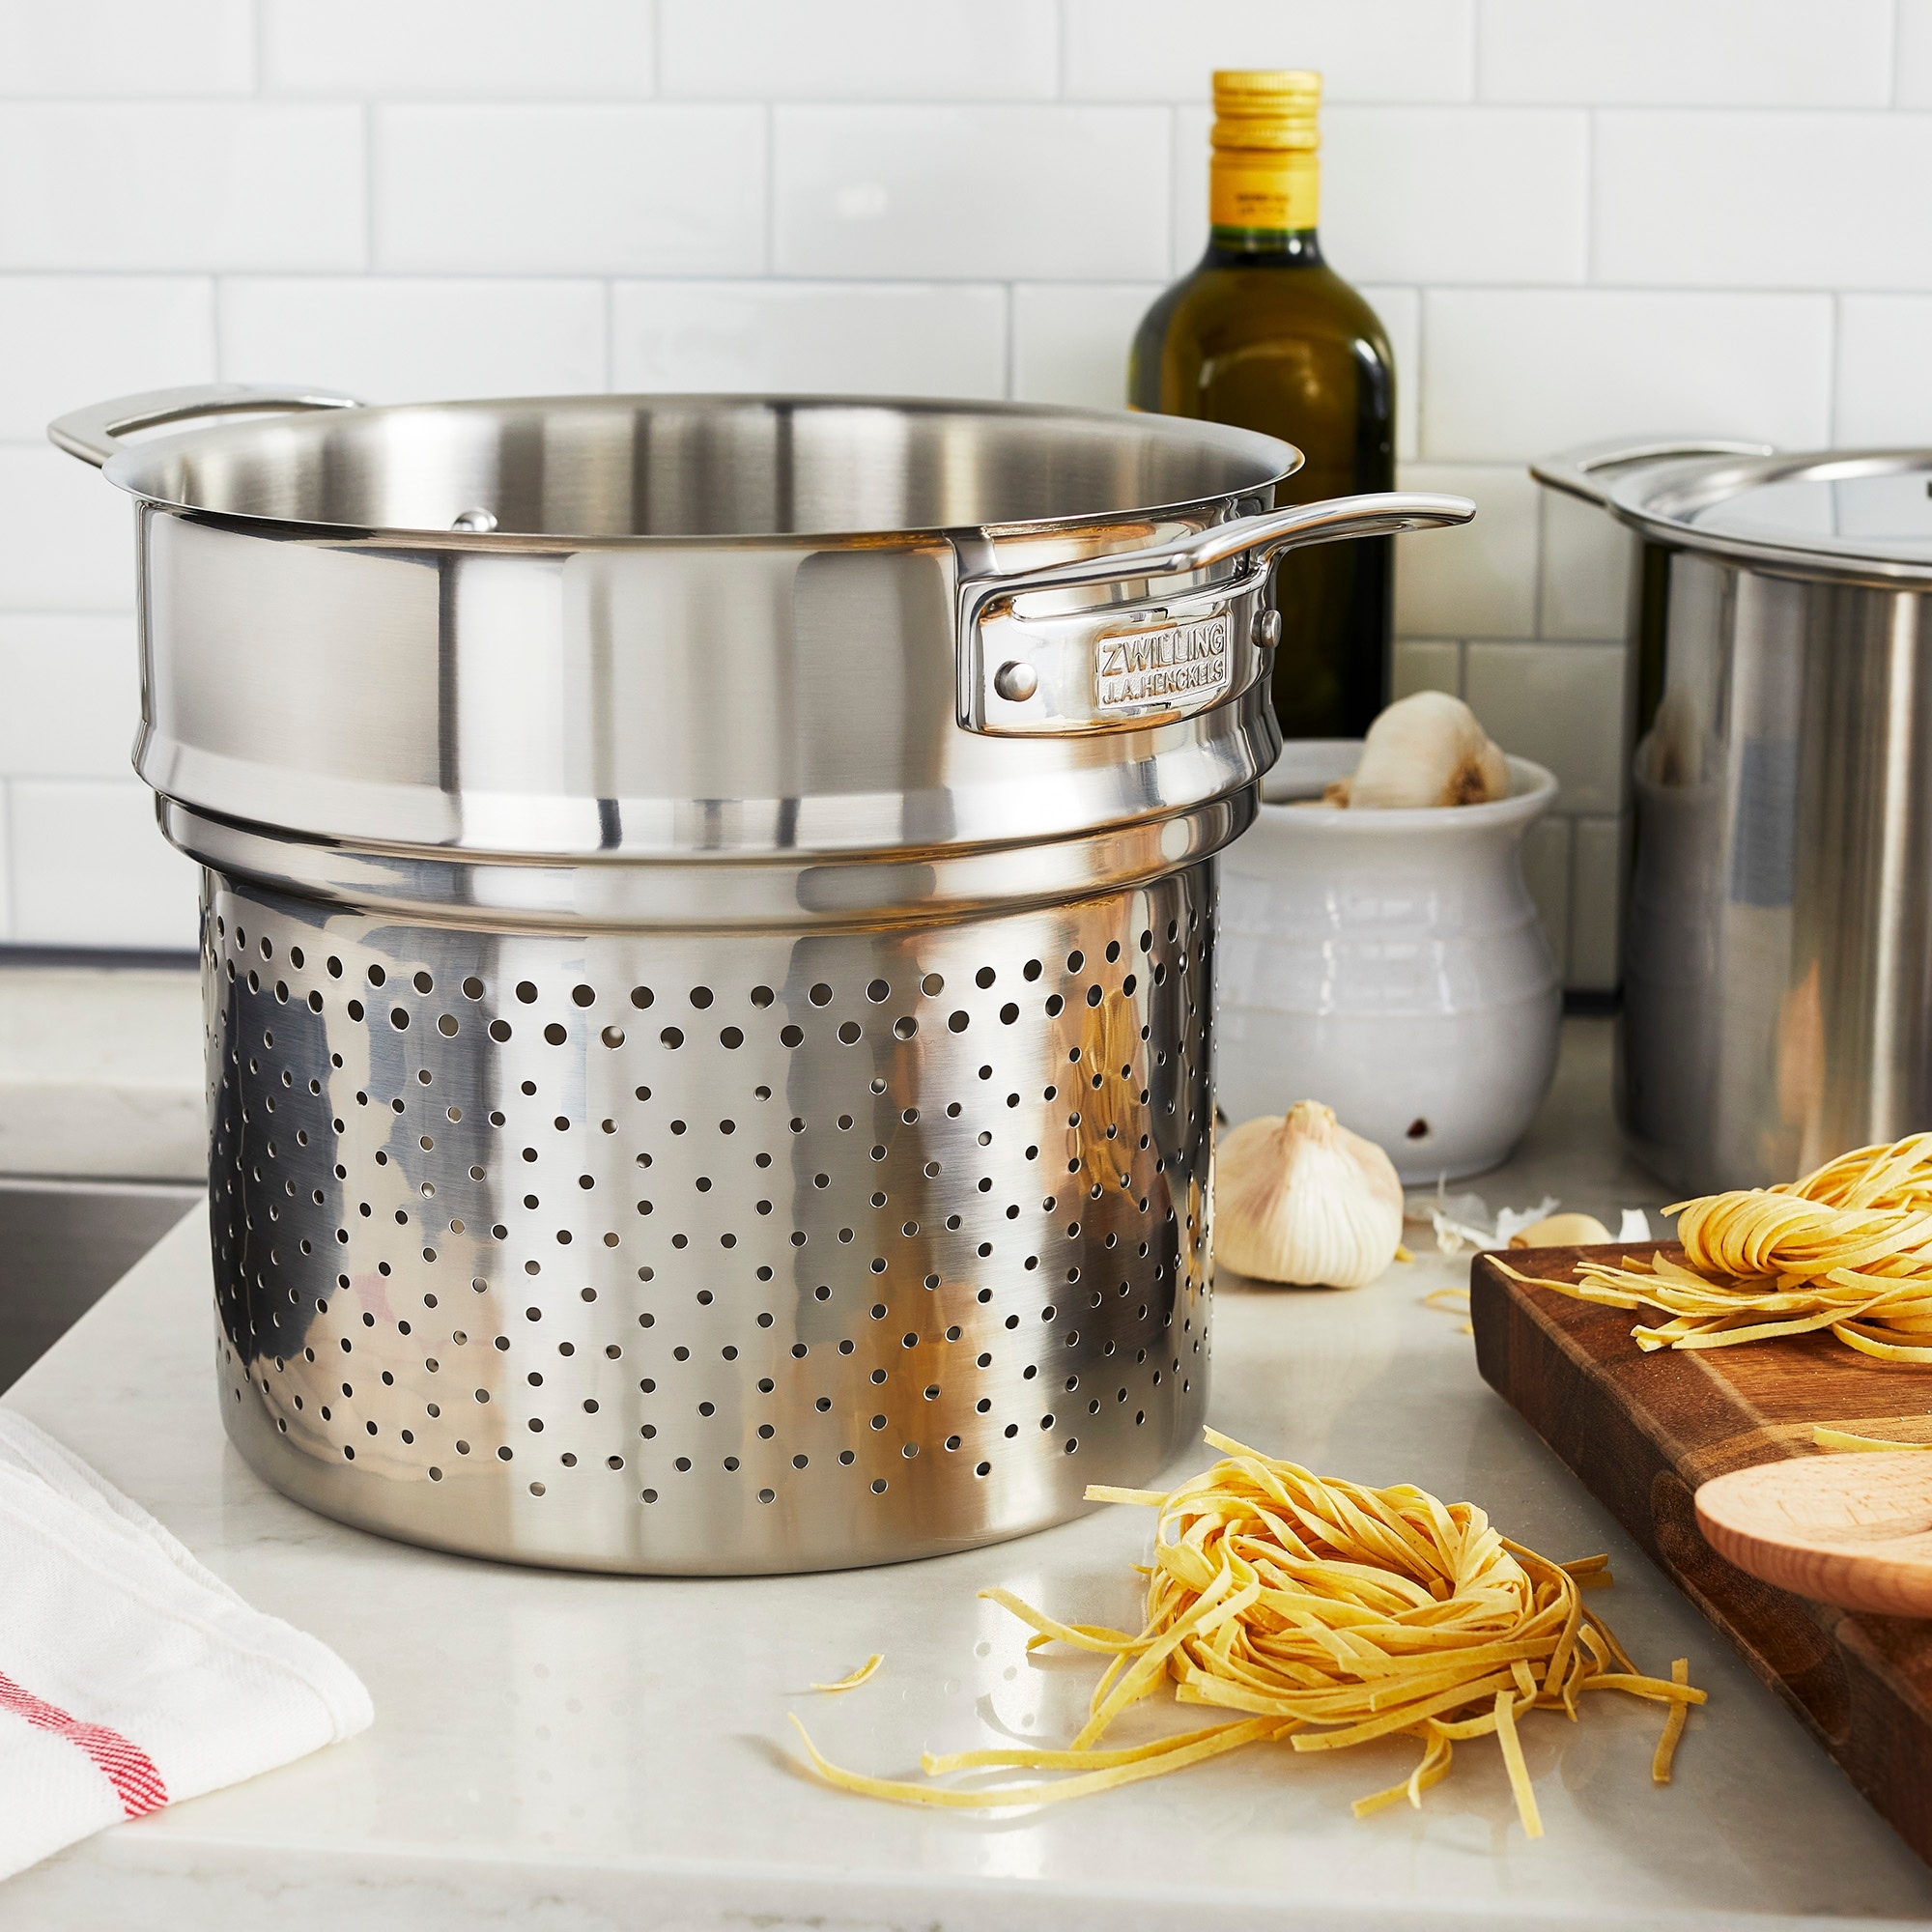 https://ak1.ostkcdn.com/images/products/is/images/direct/5f7c67533a5bb6df6d0d2c6de8274a01449e03cf/ZWILLING-Aurora-Stainless-Steel-Pasta-Insert.jpg